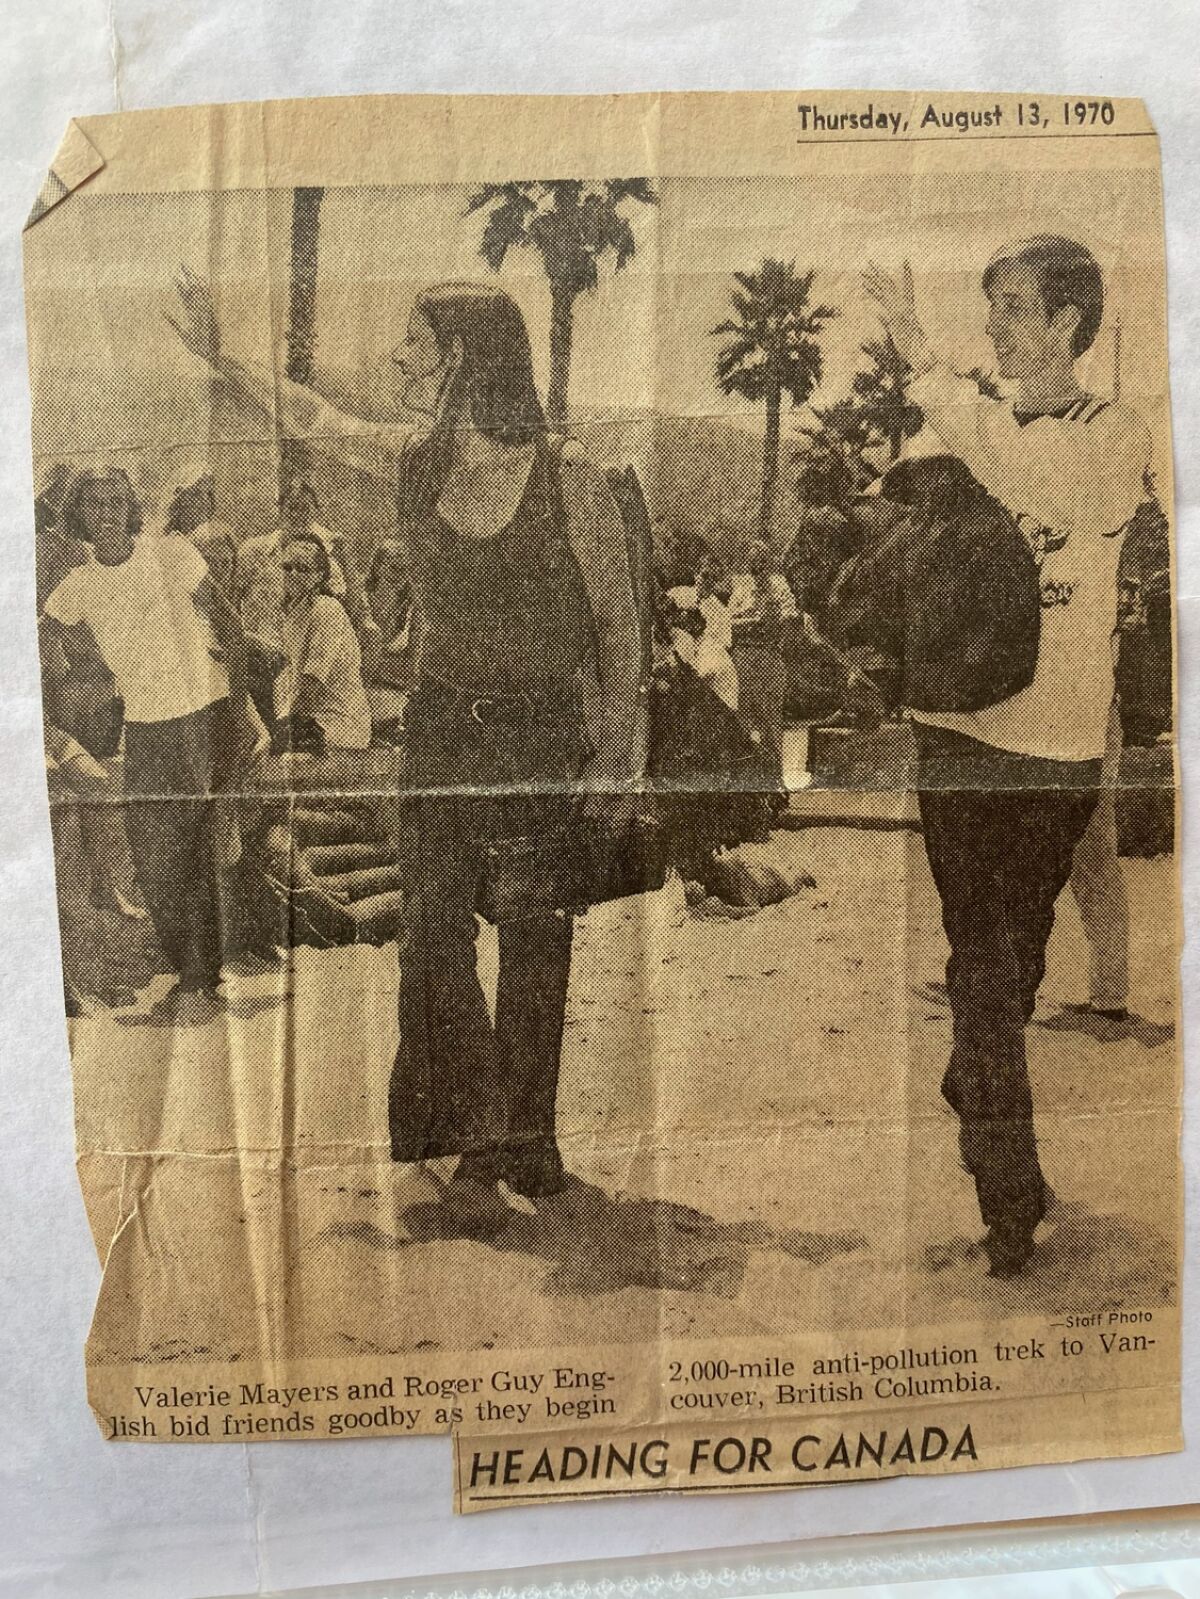 Roger Guy English and friend Valerie Mayers start their walk to Canada from La Jolla in 1970.